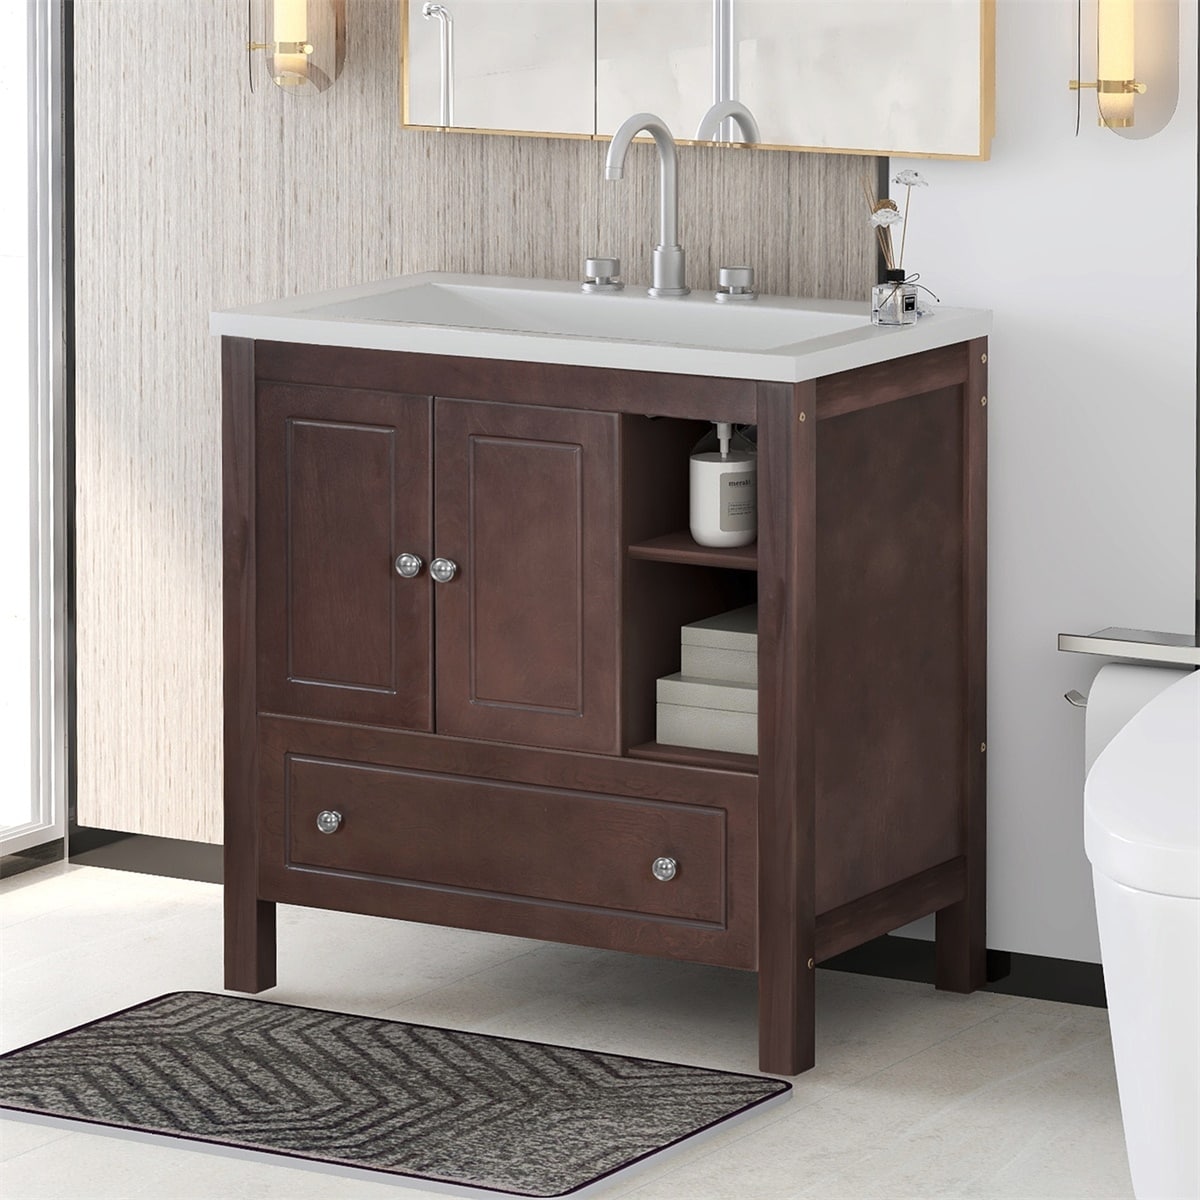 https://ak1.ostkcdn.com/images/products/is/images/direct/4eb7b122b2ba61e1e6523489d8fd77eadedc3a48/Merax-30%22-Bathroom-Vanity-with-Sink%2C-Storage-Cabinet-with-Doors-and-Drawers.jpg